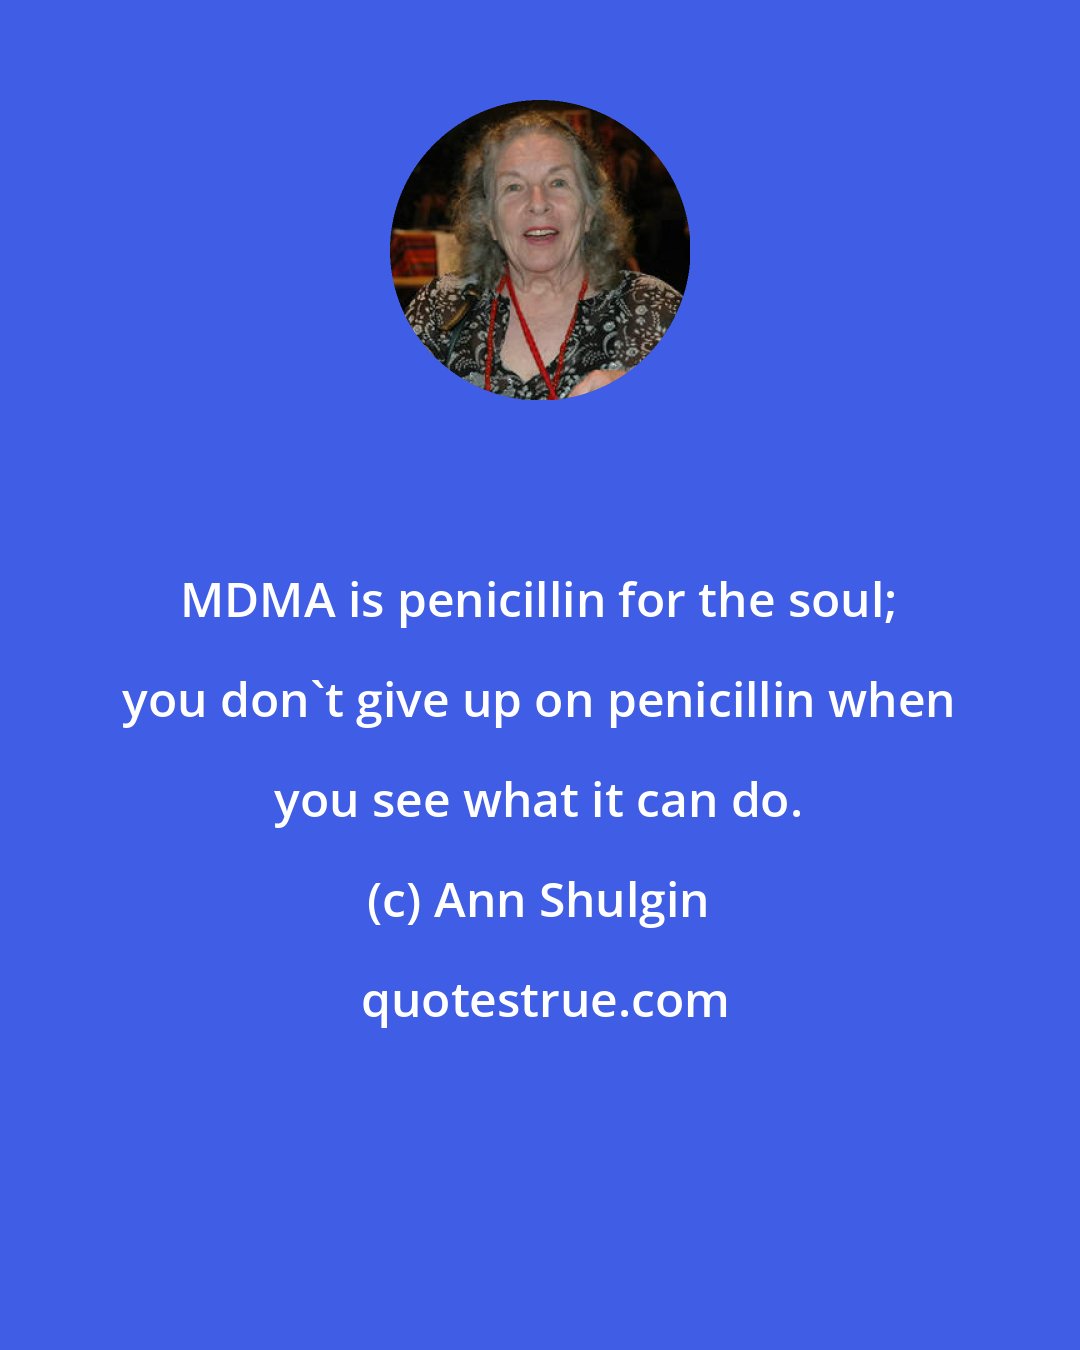 Ann Shulgin: MDMA is penicillin for the soul; you don't give up on penicillin when you see what it can do.